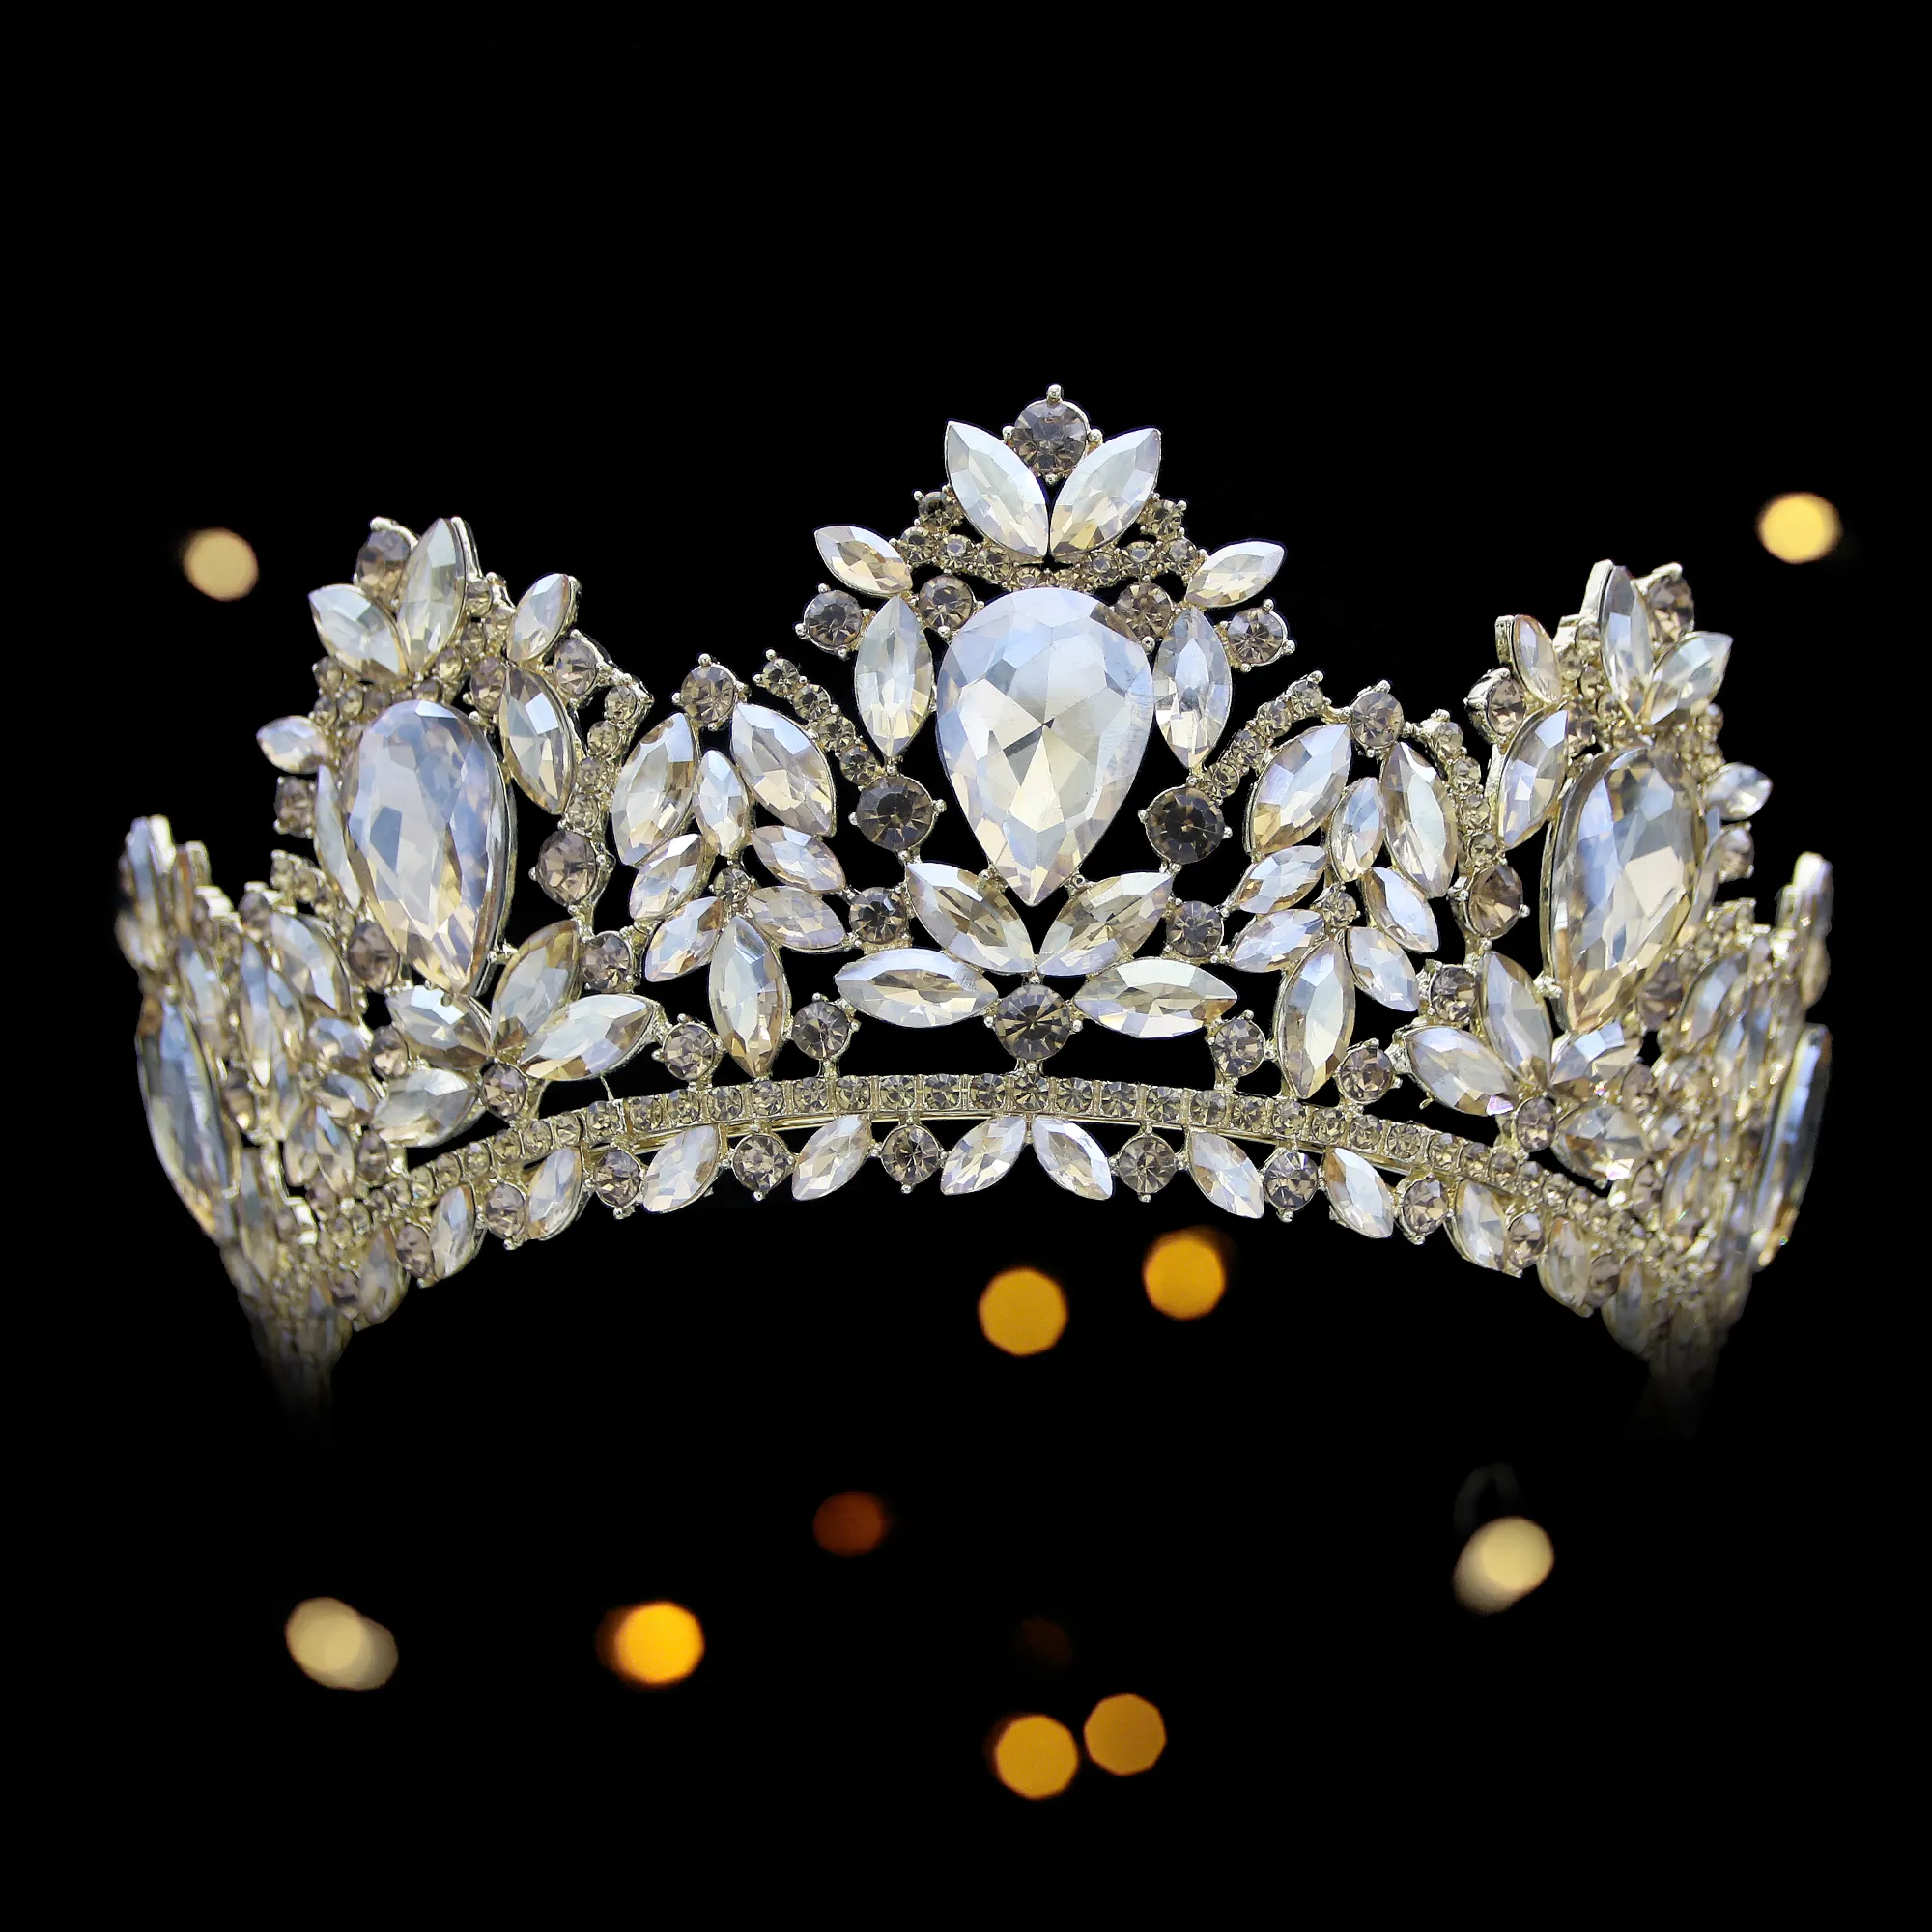 New Arrival Princess gold crown rhinestone full crystal crown pageant wedding crown and tiara for women